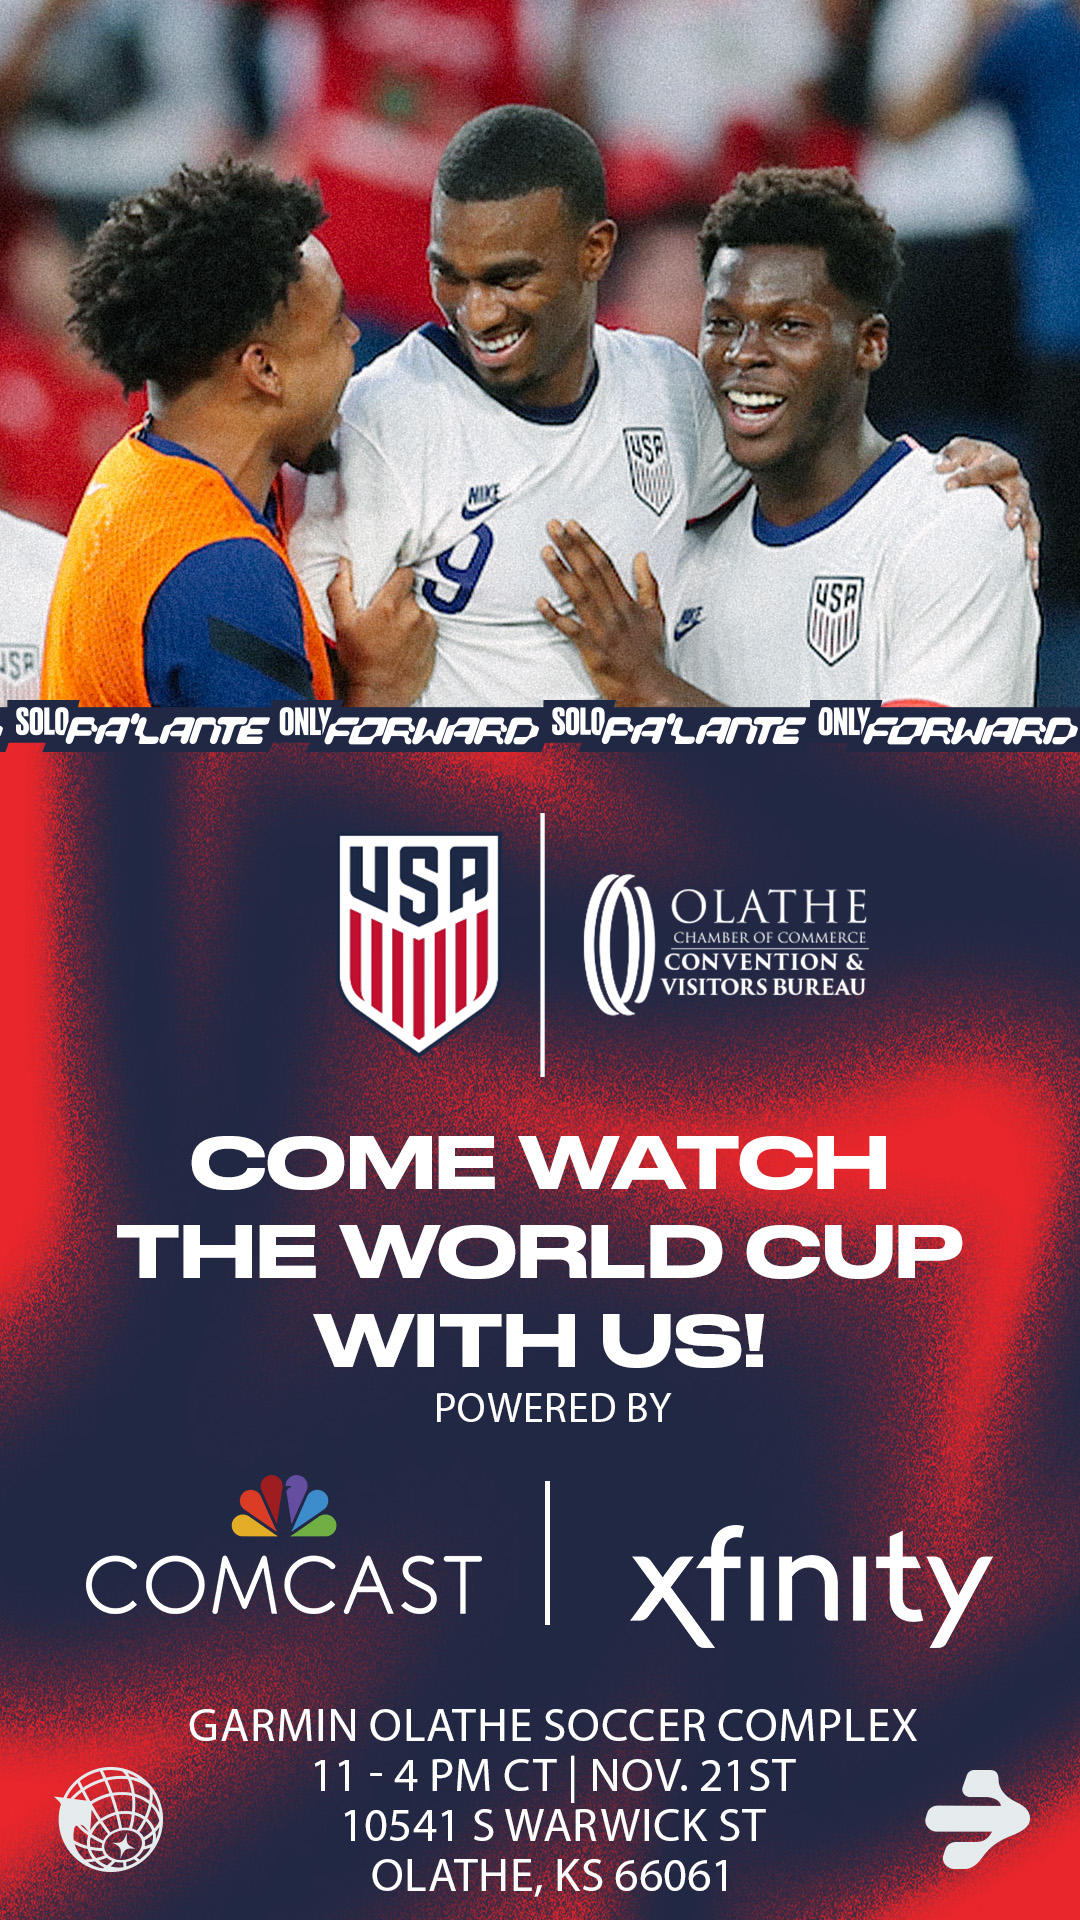 Comcast sponsoring City of Olathes 2022 official US Soccer World Cup Watch Party Comcast Midwest Region